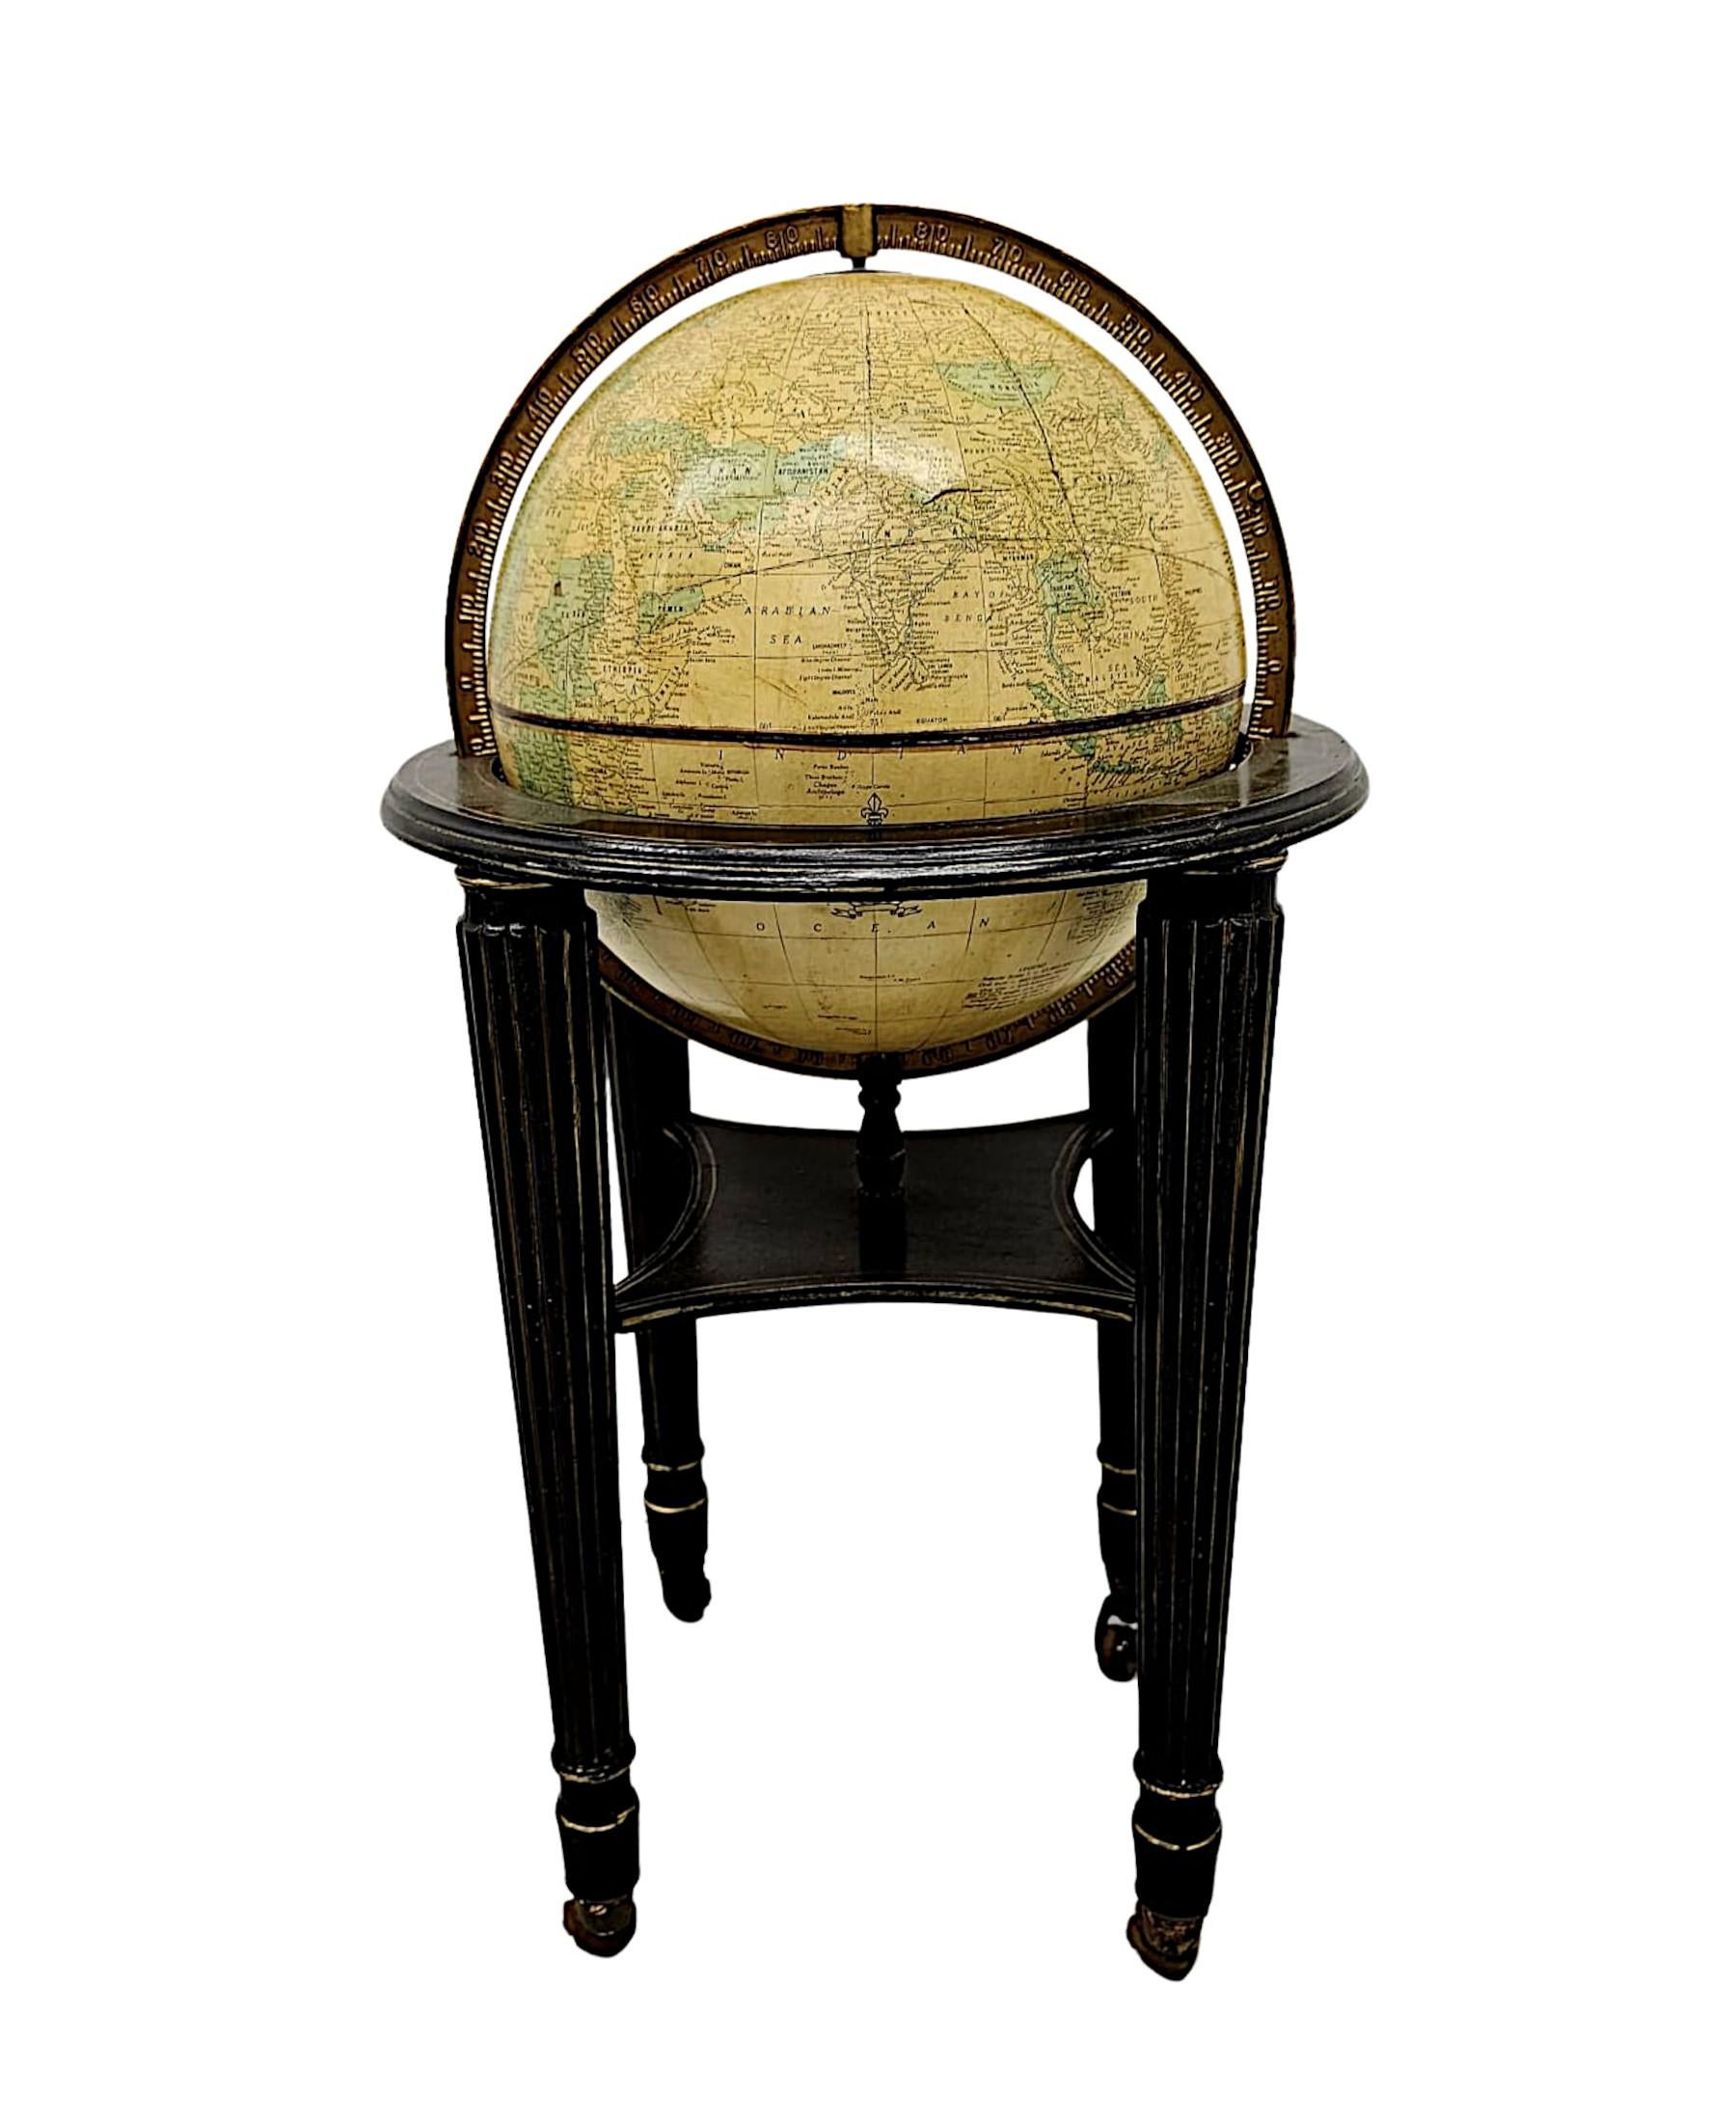 A lovely rare vintage imperial world globe featuring a finely cast brass meridian and beautifully illustrating the territorial map, ocean currents and main trade routes.  The stem holds a swivel globe which is signed Cram Universal, made by George